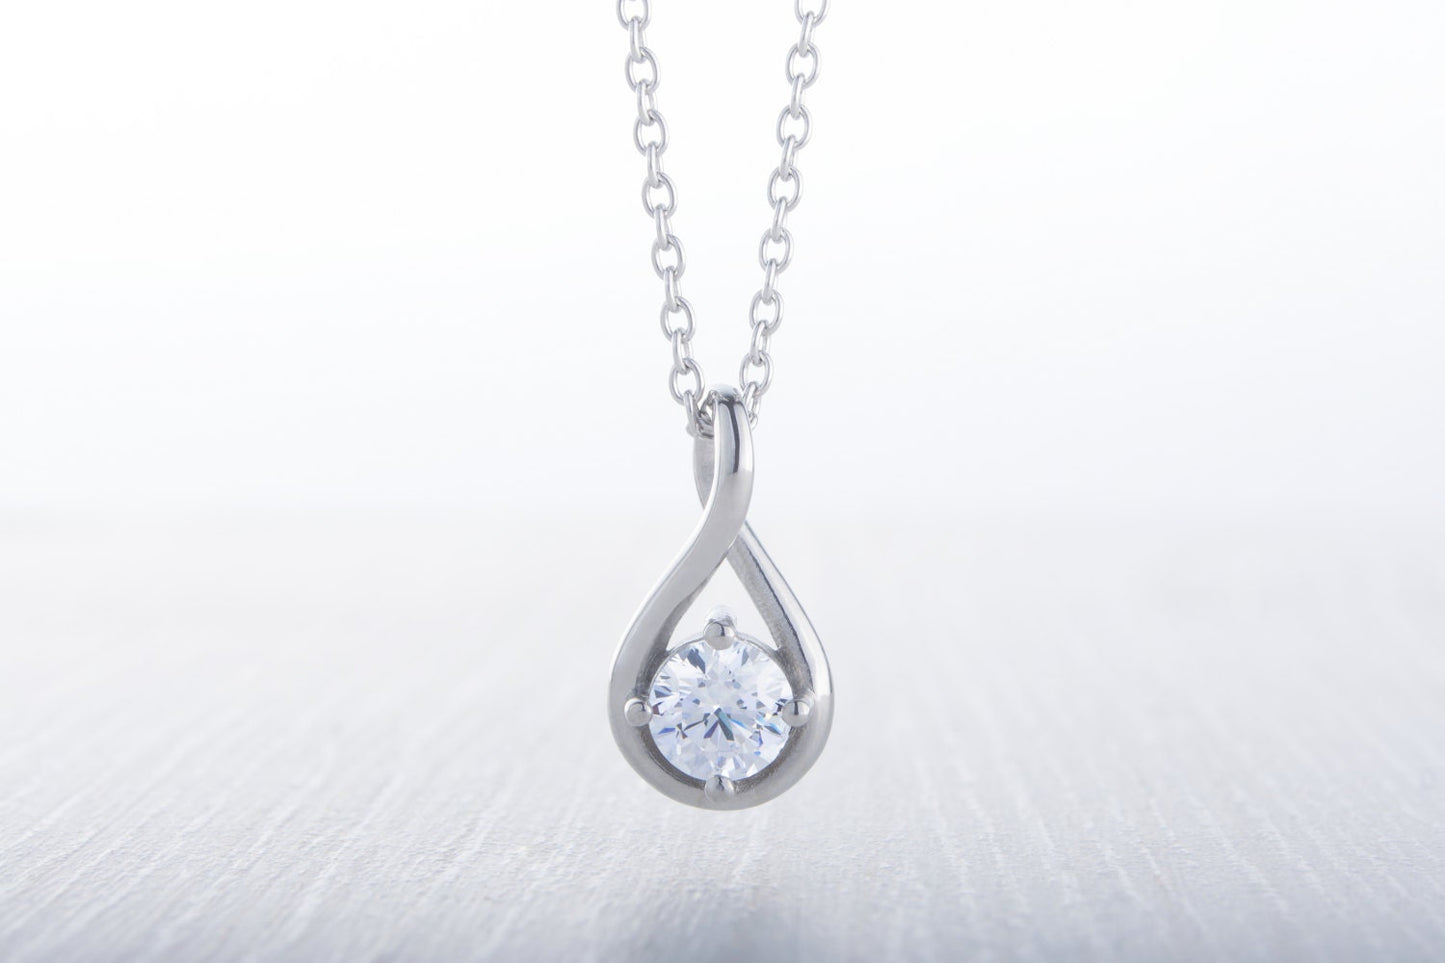 Twist style Necklace with Man Made Diamond Simulant pendant - available in 5mm, 6mm stone sizes - titanium